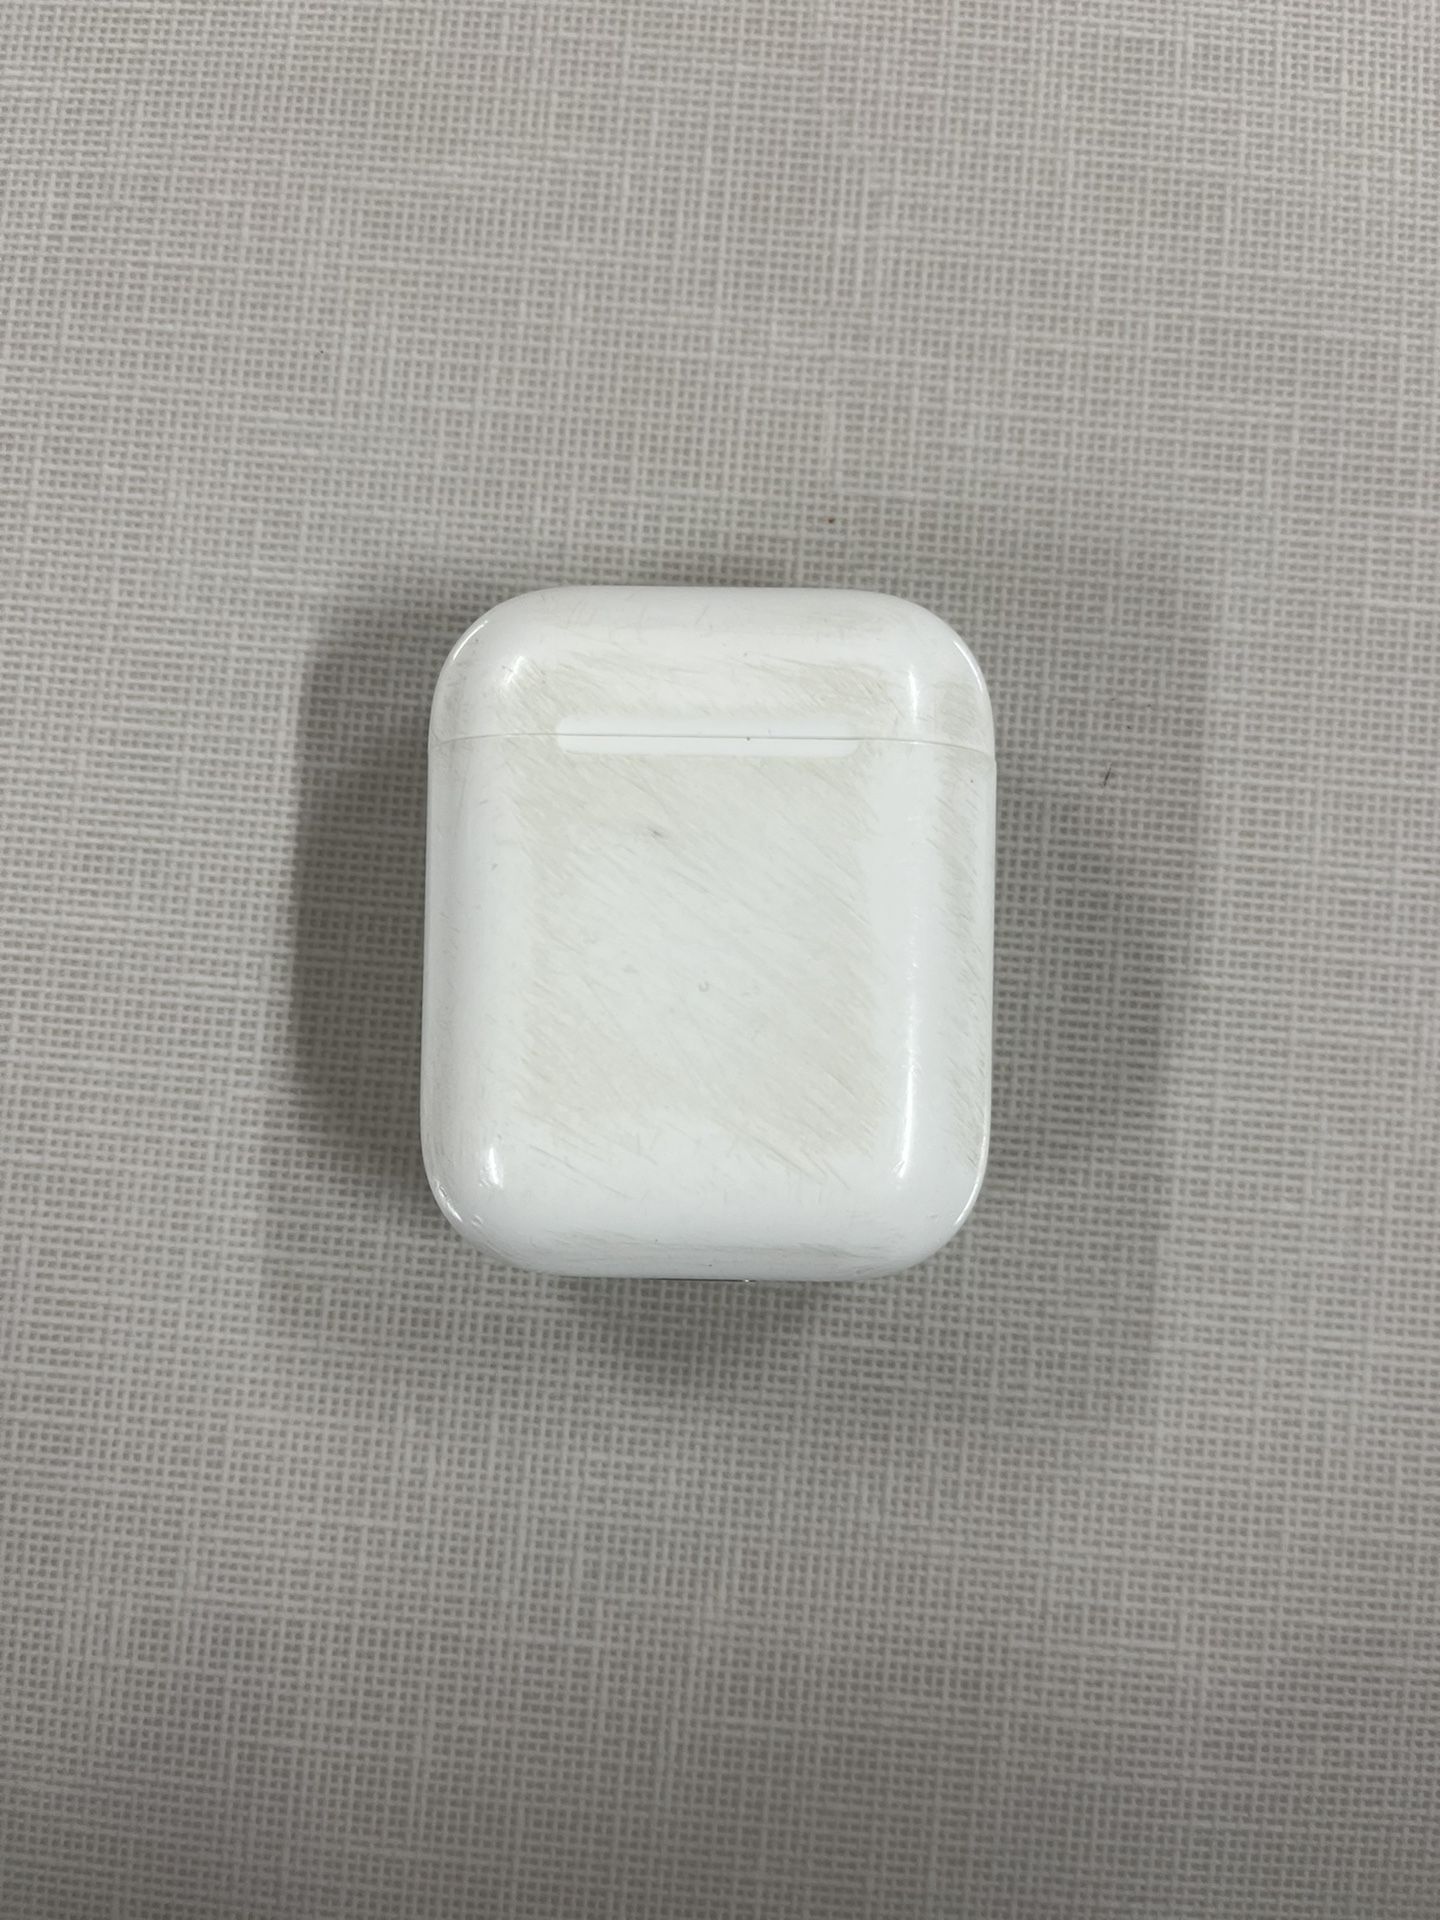 Apple Airpods Gen 1 REPLACEMENT CASE ONLY